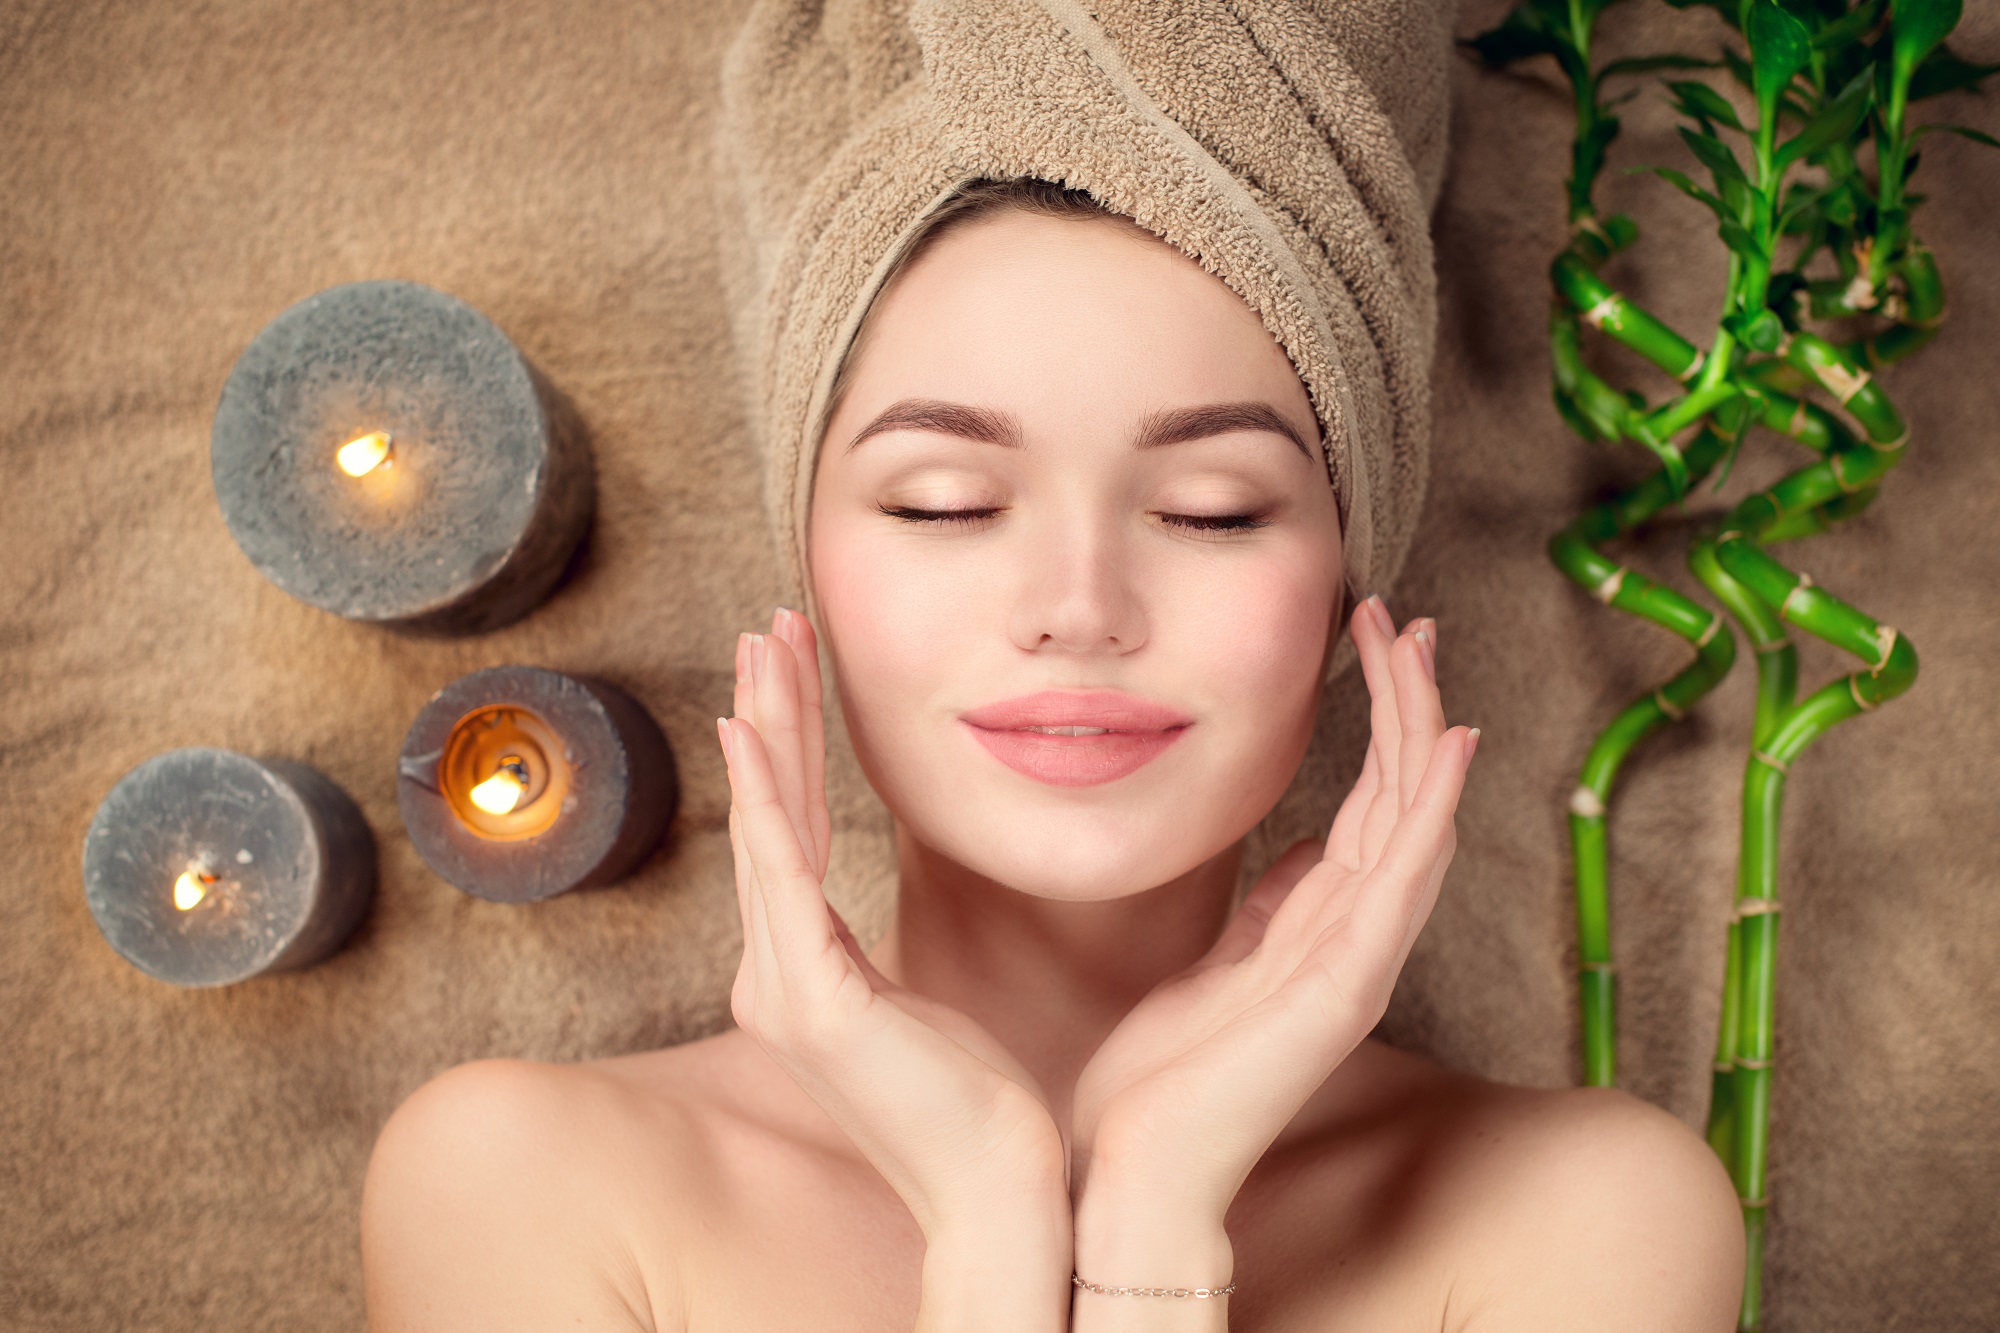 A Spa In Orange County Offers A Variety Of Services And Treatments